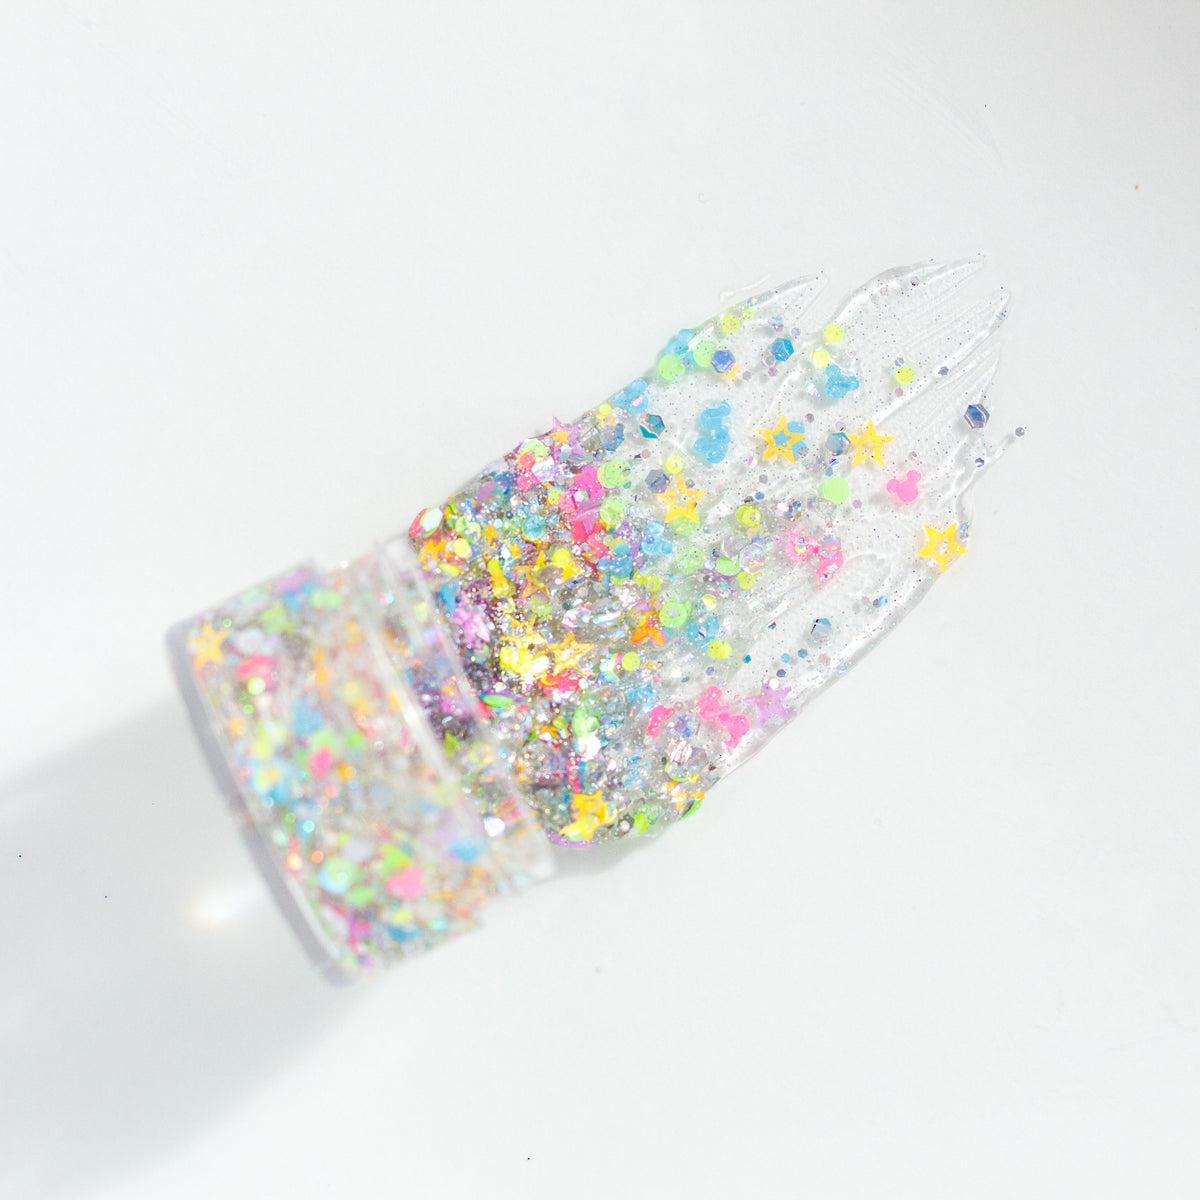 Pixie Dust Hair Glitter | Happiest Place 2.0 Collection